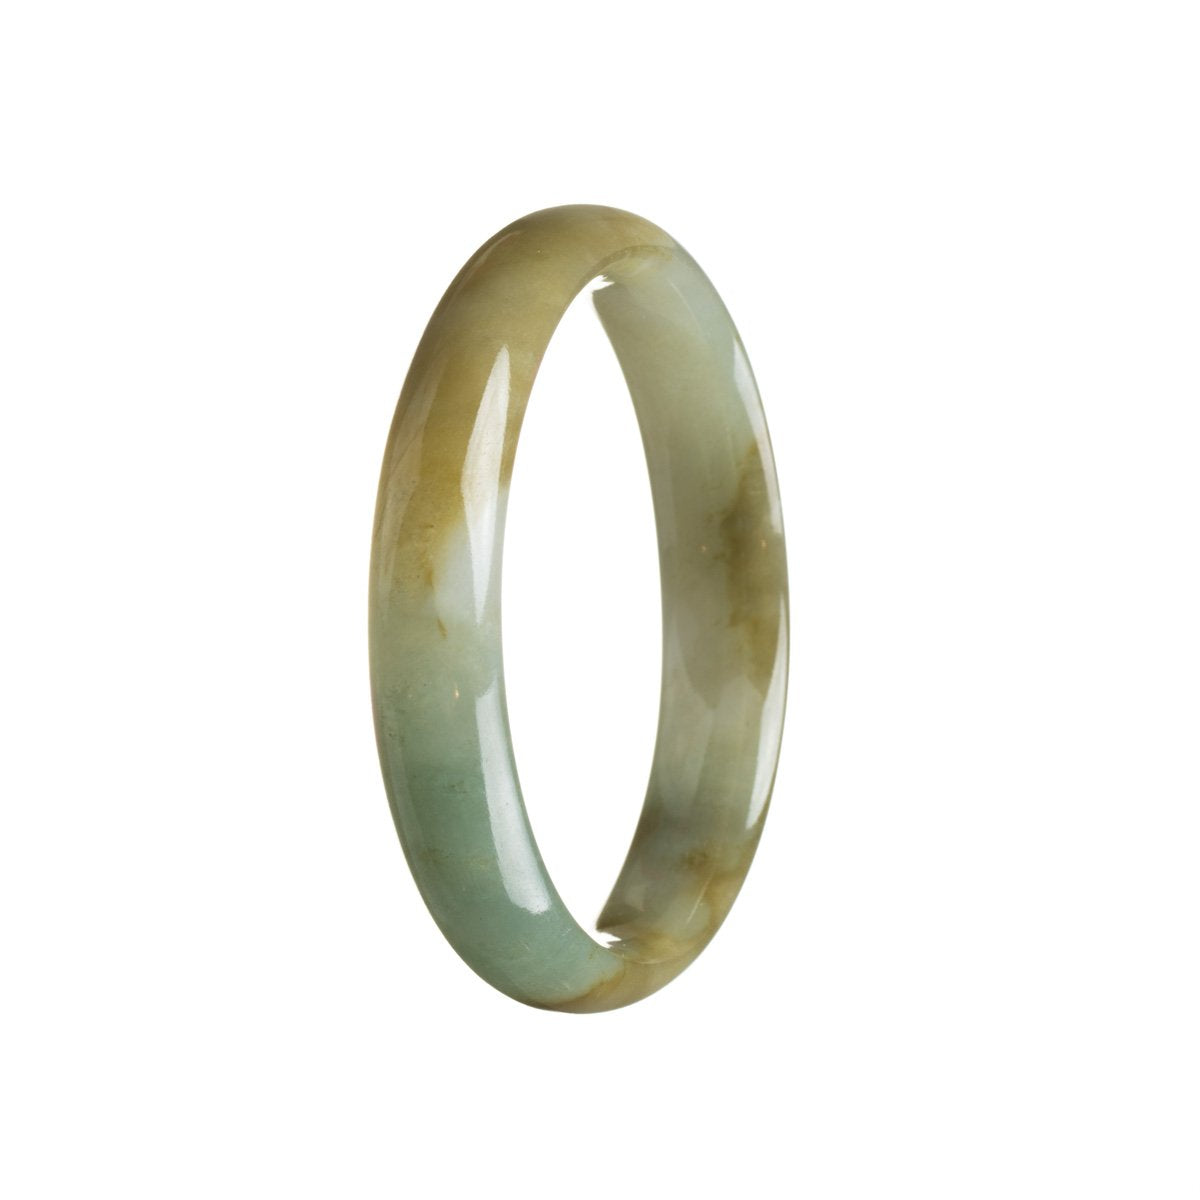 An authentic jade bangle bracelet with a natural green color and hints of brown, featuring a traditional half moon shape, measuring 55mm.